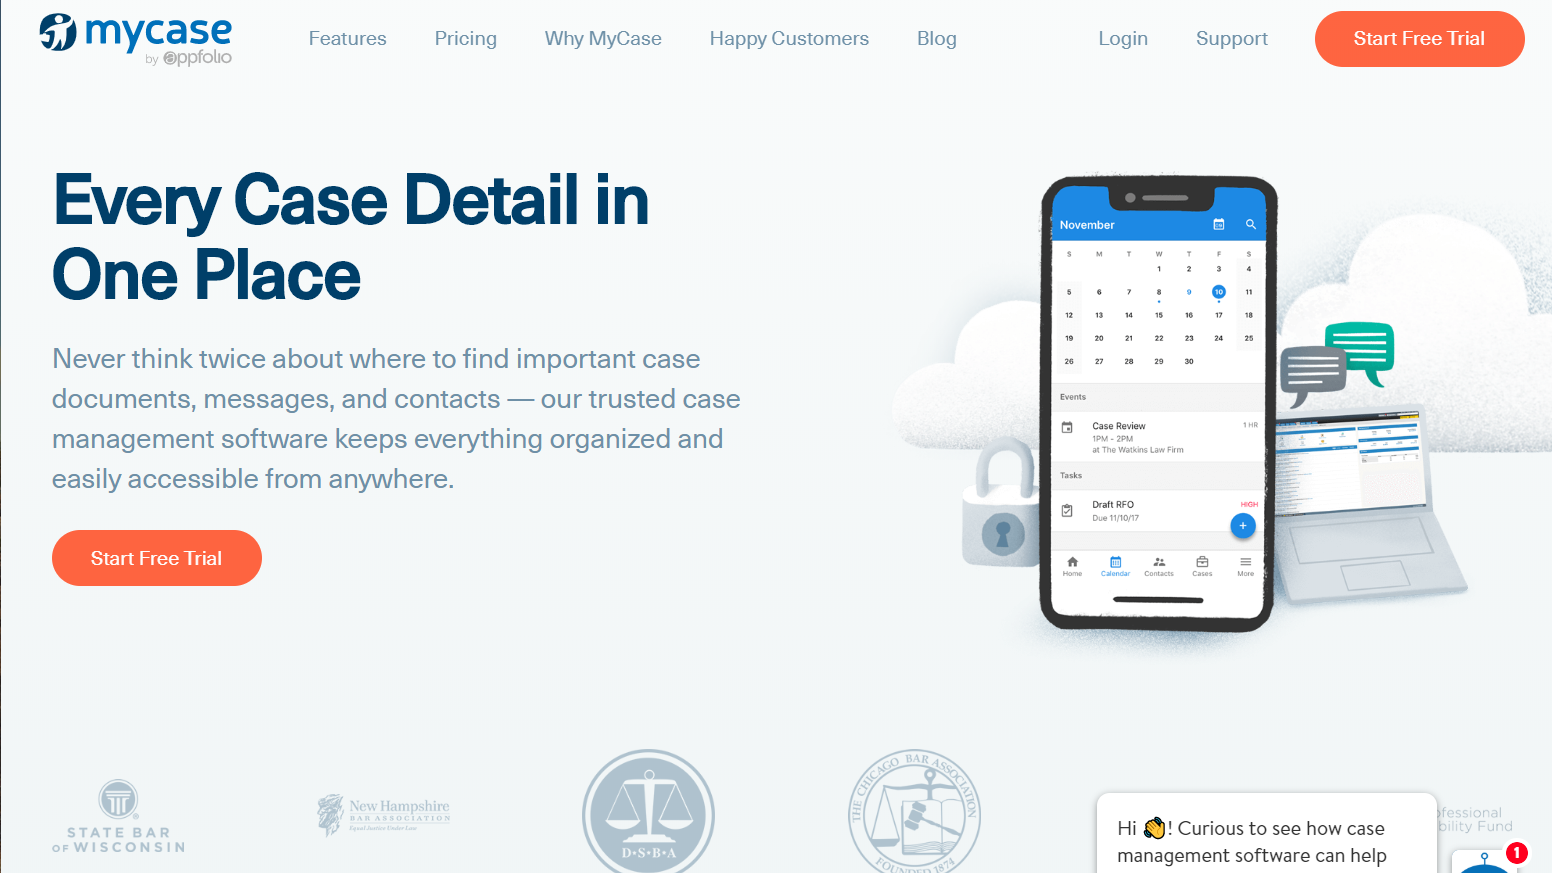 MyCase Adds E-Signatures, Online Intake, Lead Analytics, Dashboards for Cases and Leads, and More